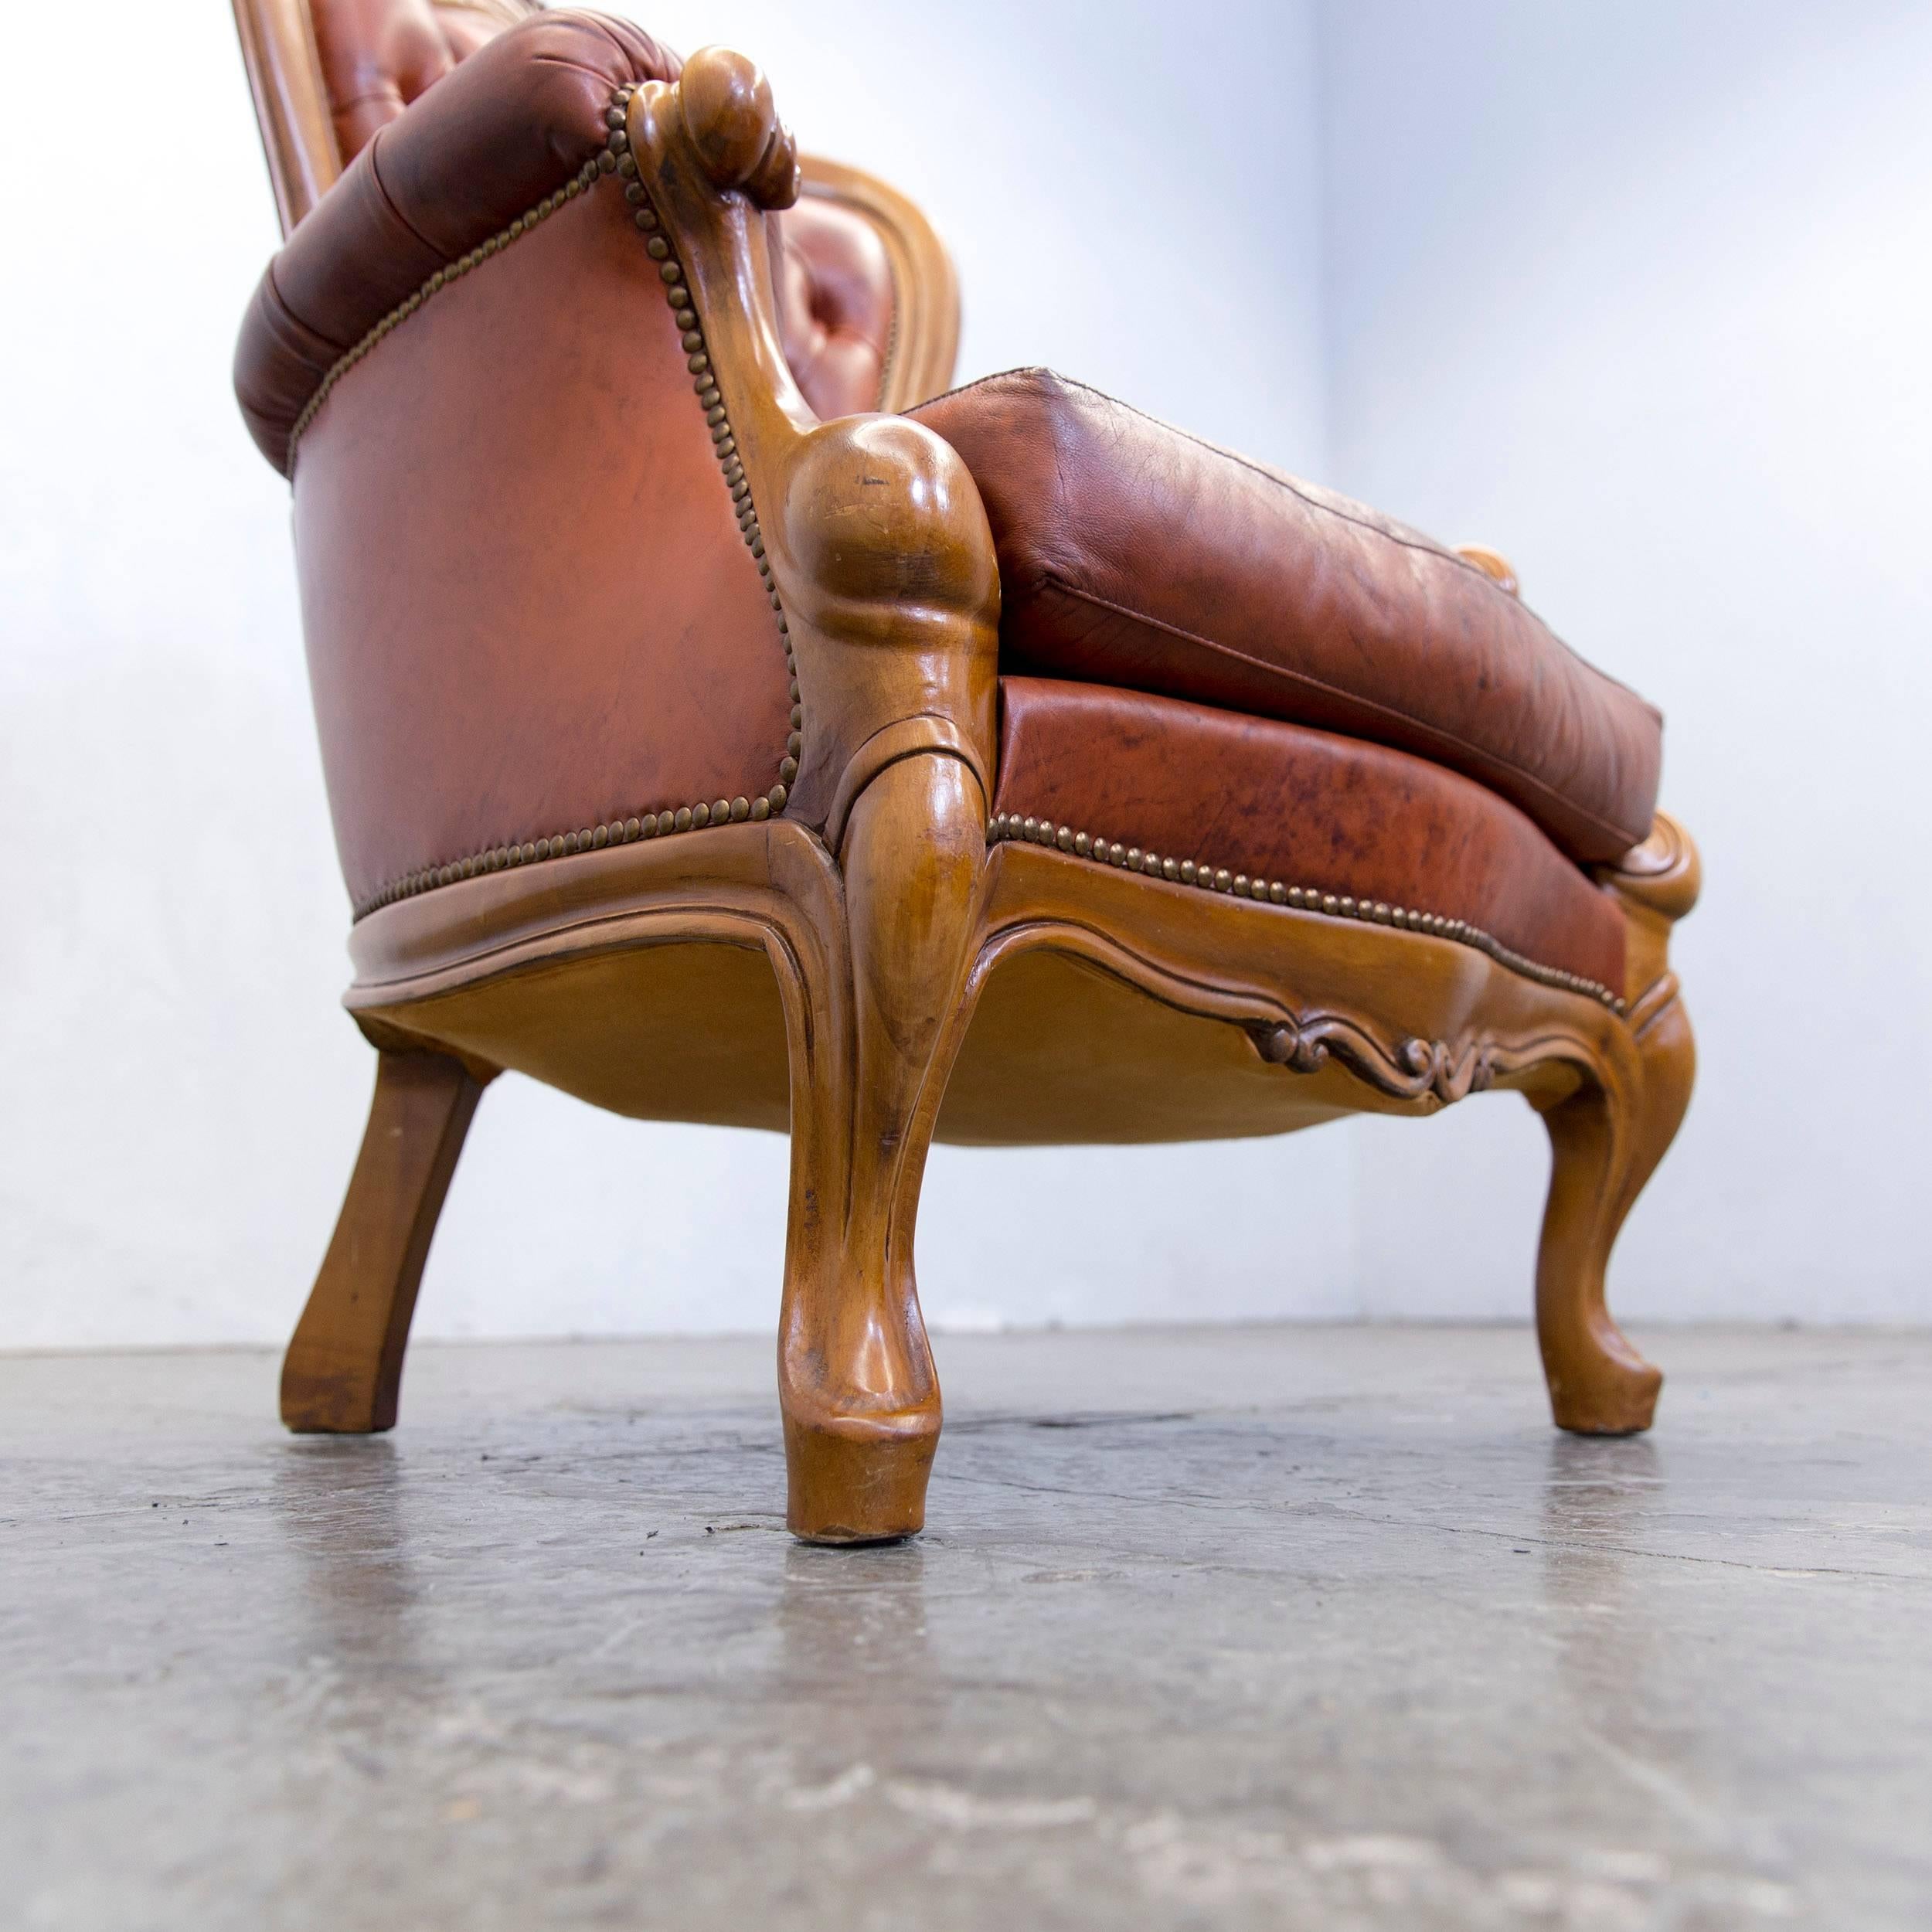 20th Century Chesterfield Armchair Leather Brown One Seat Wood Barock Vintage Retro For Sale